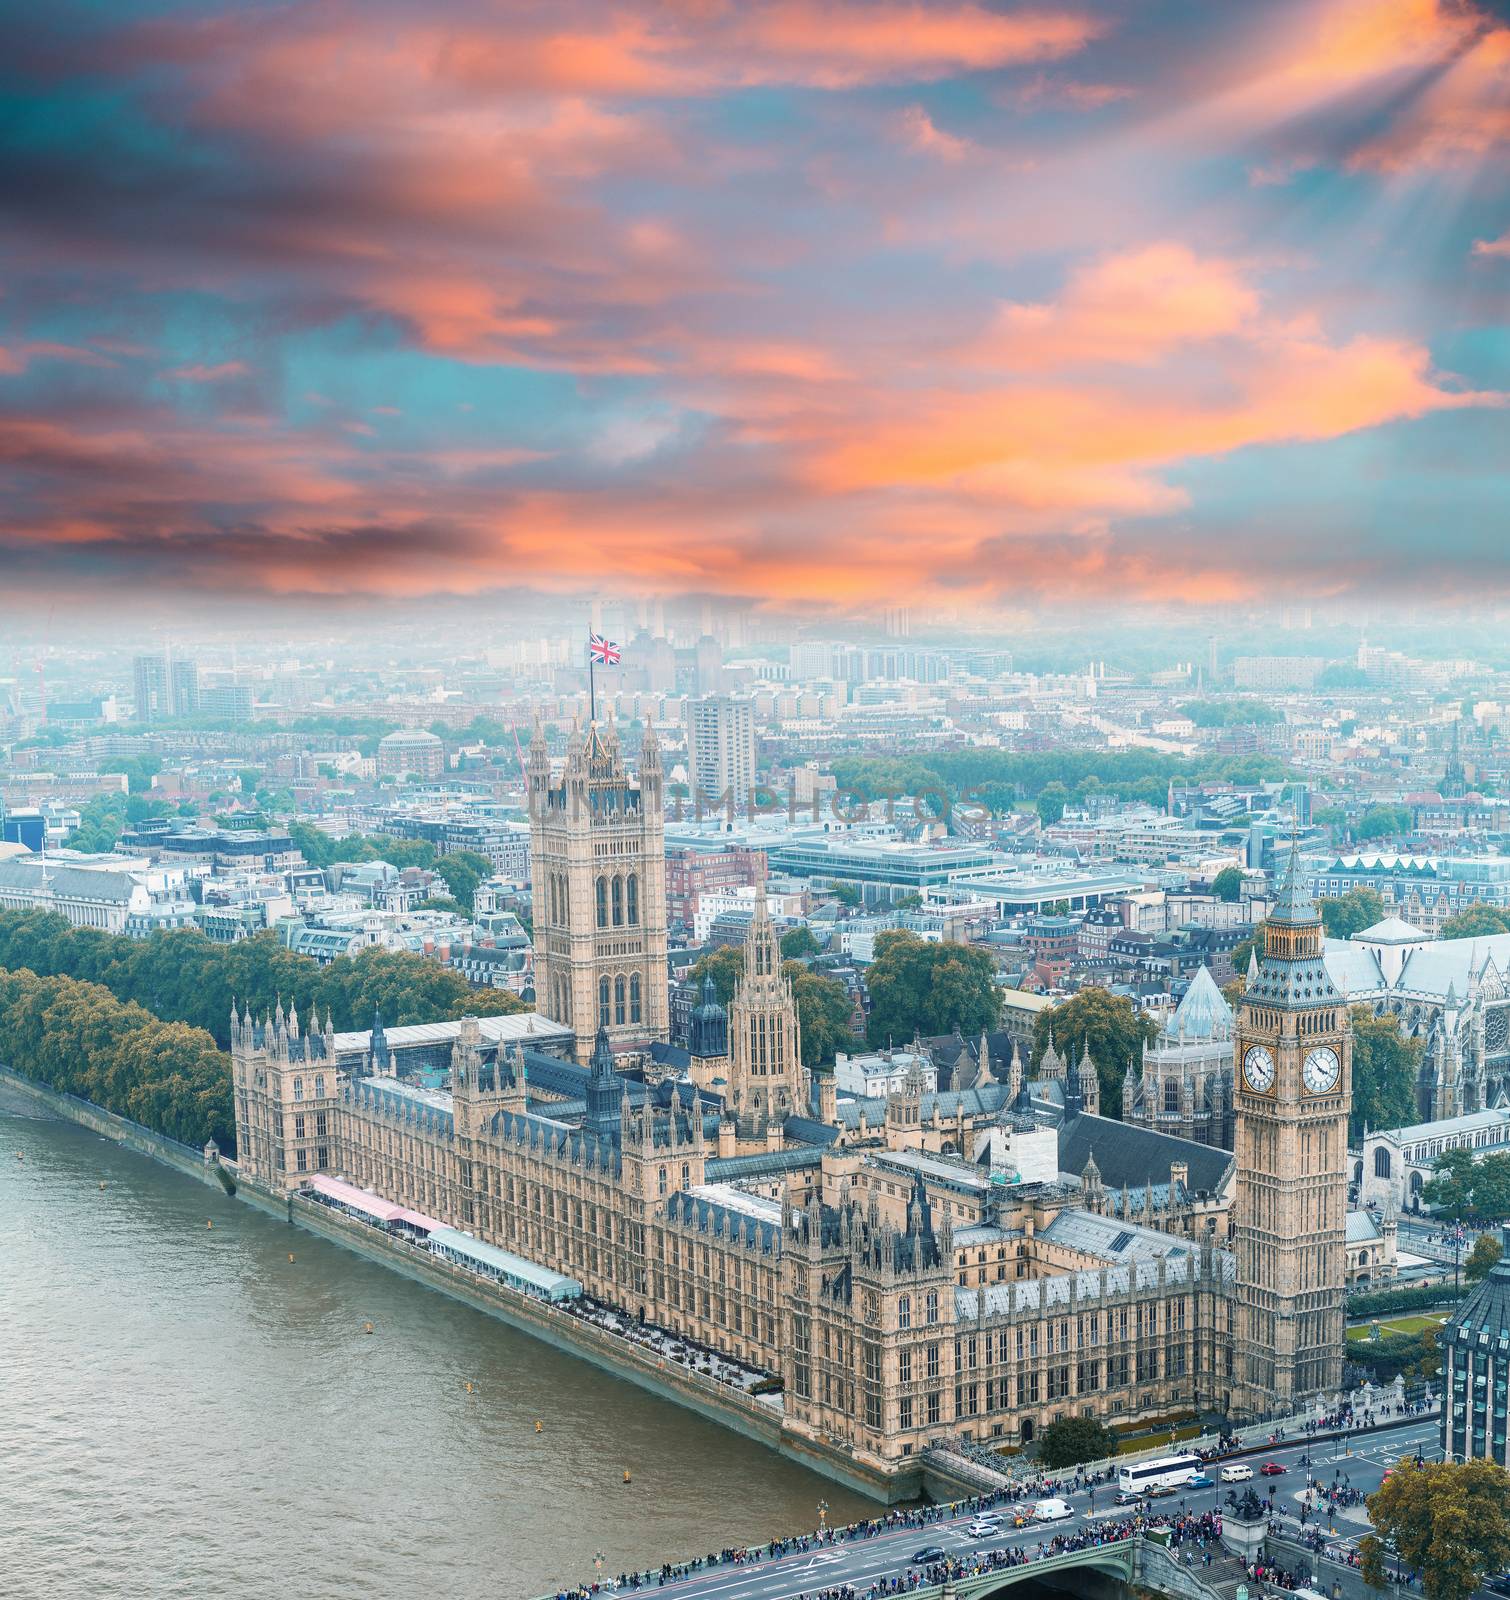 Wonderful aerial view of Big Ben and Houses of Parliament in Wes by jovannig